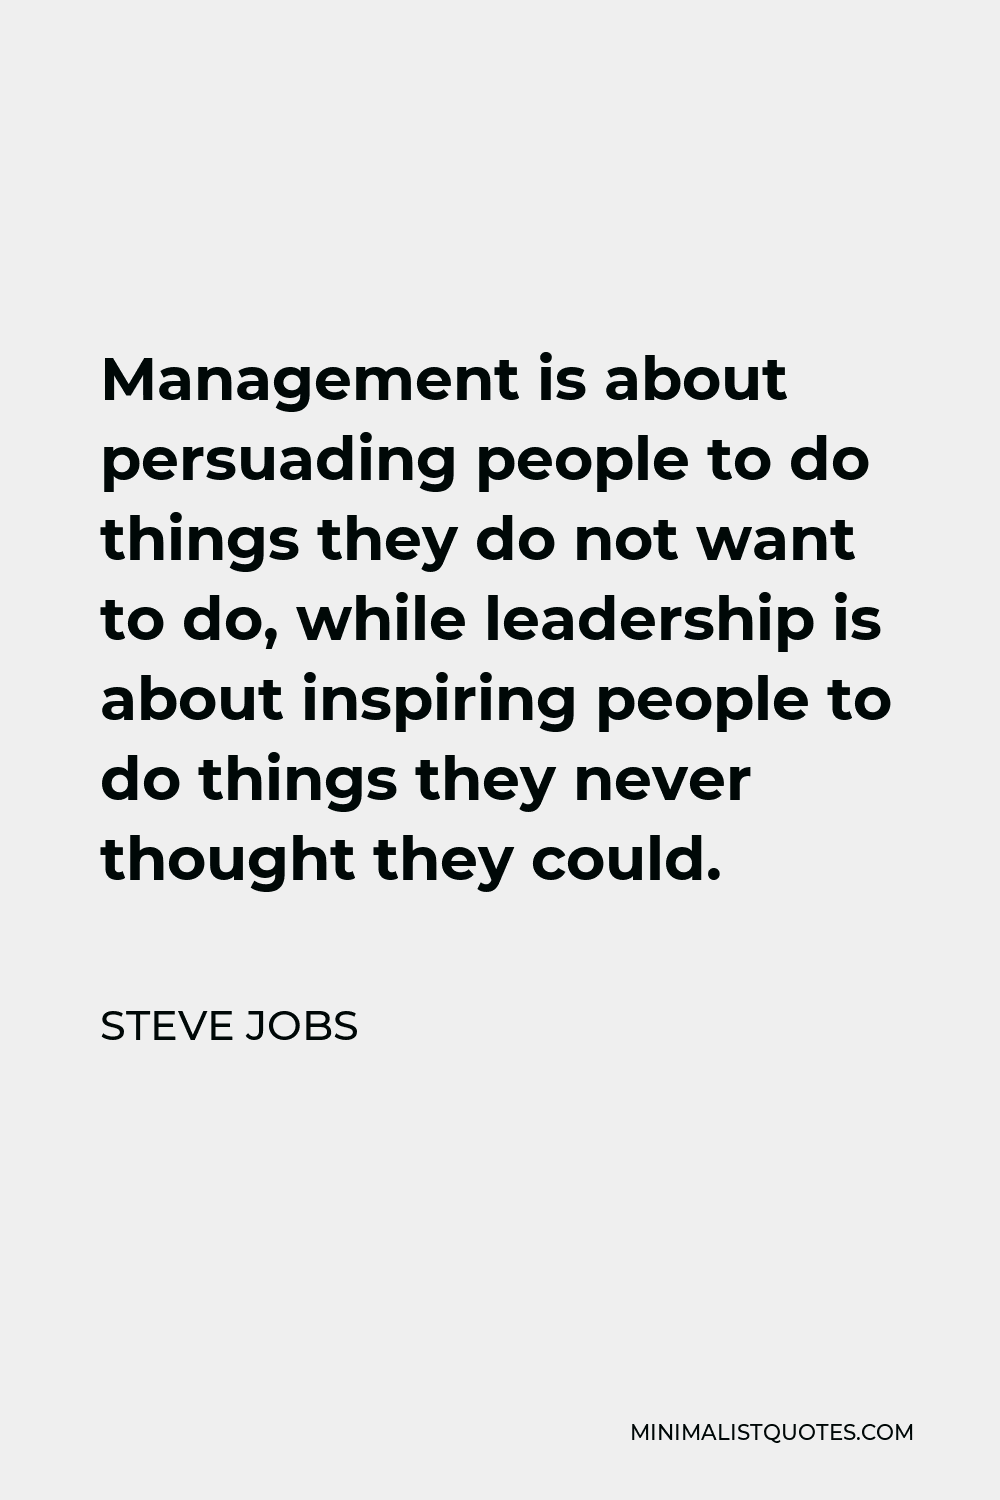 Steve Jobs Quote - Management is about persuading people to do things they do not want to do, while leadership is about inspiring people to do things they never thought they could.